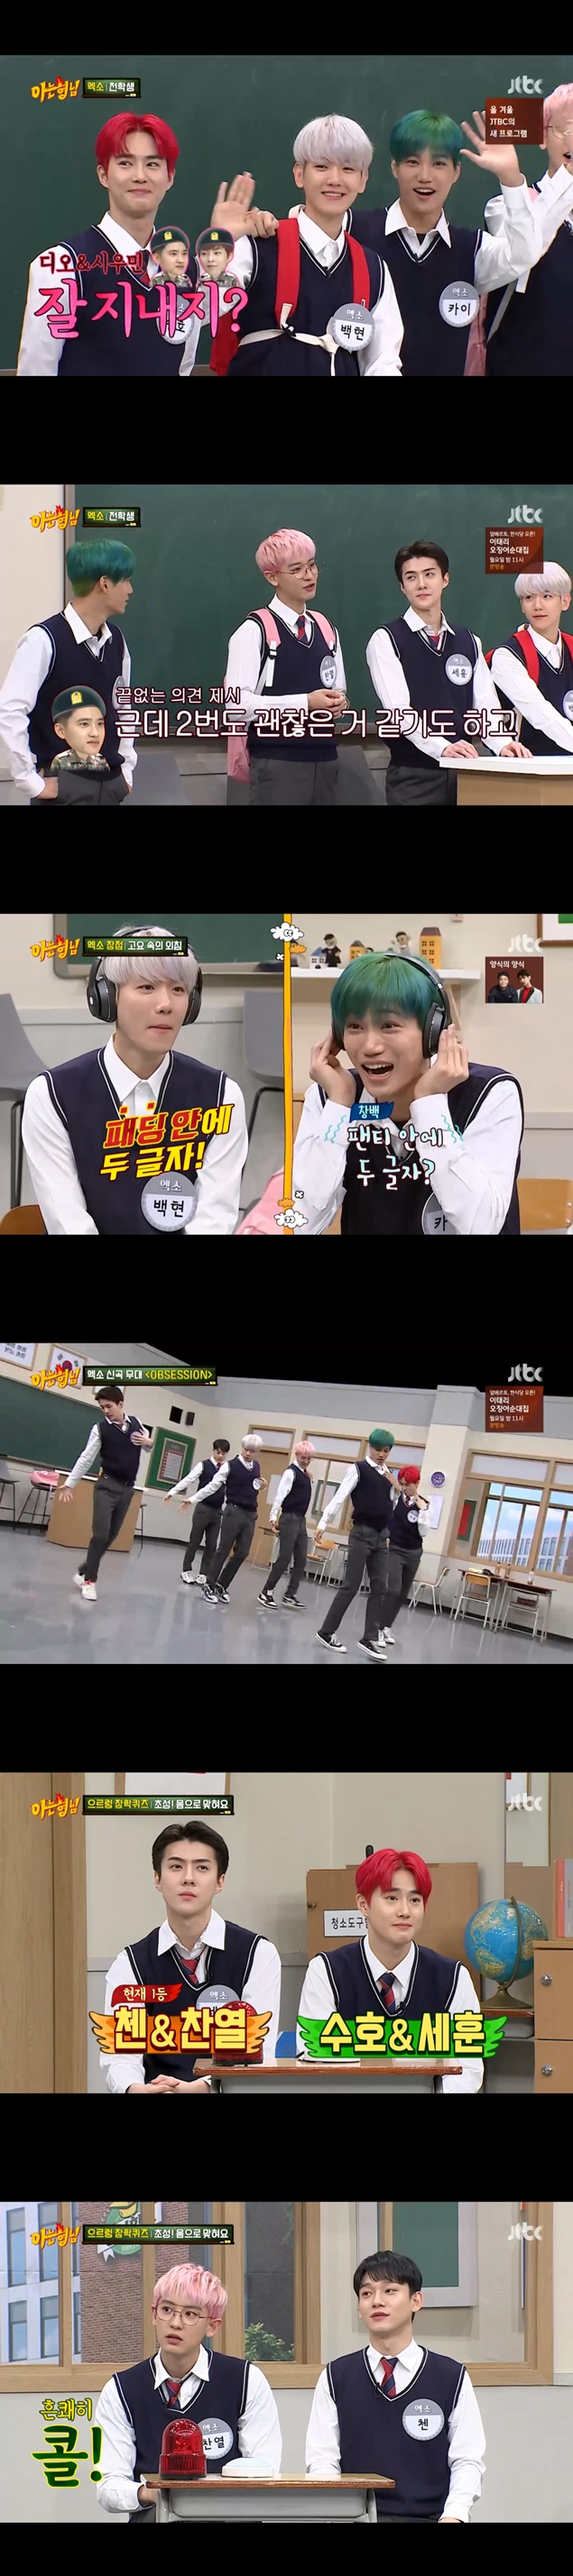 EXO devastated my brothers school with laughter.JTBC entertainment program Knowing Bros (hereinafter referred to as sub-type), which was broadcast on the afternoon of the 7th, depicted EXO who visited his brothers school as a former student.Kang Ho-dong asked, Did you get a mate? when EXO appeared as a transfer student.EXO said, The EXO of other people in us is called X-E X O. Fans say that X-E X O is called a police officer. I suggested that Mr. Lee should do it, he said.Brothers asked Chanyeol how many of the EXO members were in their appearances; Chanyeol replied I; followed by Sehun in second place; and Suho in third place.But Chanyeol was in trouble from fourth, and Chen, who saw it, said, Is it that hard? Chanyeol laughed, saying, Its hard, its that close.Suho ranked first in appearance among the members, followed by Sehun in second place, Kai in third place, Baekhyun in fourth place, and Chen in fifth place.Suho said, Changing Chanyeol, so Chanyeol said, Ill change it, and laughed, Its nothing, Suho is a friend who knows entertainment.Chanyeol said, In the case of Xiumin, we talk more than we do in a group chat.I couldnt go when I was going to Xiumins army, Kai said, adding: So I replied every day, But I didnt know Id be in touch so much, Im coming all week.So I chew a little these days, he laughed.Chanyeol said, When I set up a new song title song, EXO D.O. said, I like 3 times, but I think its okay twice. But Chanyeol added a laugh, saying, I did the title song with number one.Chen asked Suho, Is it a little narrow in the original? Suho said, I think its narrow, and explained, Im not even going to have two members because I have fewer members.Chen started a cry in the stillness with Chanyeol, who described him as exO representative but Chanyeol continued to answer tempo songs? and laughed.Baekhyun, who then participated in the game, explained to Kai that it was two letters in the padding; however, Kai misunderstood the Baekhyun words as underwear.Classroom was devastated by laughter.Finally, Suho, who came to the game, became a team with Sehun; Suho explained with the best of his ability, but Sehun added a smile by saying I cant hear the sun clear.My mom likes EXO D.O. because of the drama, said Kai, who also said Chanyeol, My mother likes EXO D.O., and even my sister likes EXO D.O.I like it. My sister said, Why did not you call the celebratory light? Chanyeol said that Baekhyun had said a word to him because of Baekhyuns sadness.Chanyeol said, I went to the practice room after the vocal surgery. I was splashing the ball in the practice room to wait for the members in a pleasant heart, but Baekhyun said, If you are going to splash the ball, go out and fry it.Baekhyun explained, I was talking about it as a joke.Sehun cited EXO D.O. as being recognized for its cooking skills as the story of the army that EXO D.O. gave me on vacation.Sehun said, My brother likes cooking and has a certificate of Korean cook. I was proud of EXO D.O. because it was rumored that EXO D.O.s food was delicious in other units.The EXO members participated in the Run Scholarship Quiz with their brothers. EXO members and brothers were fiercely quizzed.Eventually, the Chen X Chanyeol team won the first place and won the hot dog.The members and brothers participated in the second periods Mix Music Quiz; Kai and Lee Soo-geun played Ring Ding Dong dance battles.Lee Soo-geun recreated Ring Ding Dong dance with a creative approach and devastated Classroom with laughter.Meanwhile, Jang Titzer, Jang Sung-gyu and Dong-Seon Shin Dong welcomed job counselors Lee Seung-yoon and Kapithu along with former student Jeong Se-woon, who raised expectations by foreshadowing a new corner of Knowing BrosKnowing Bros (subtype) is an entertainment program that aims to play all the worlds Game in the school of reason, loss, instinct and faithful brother.